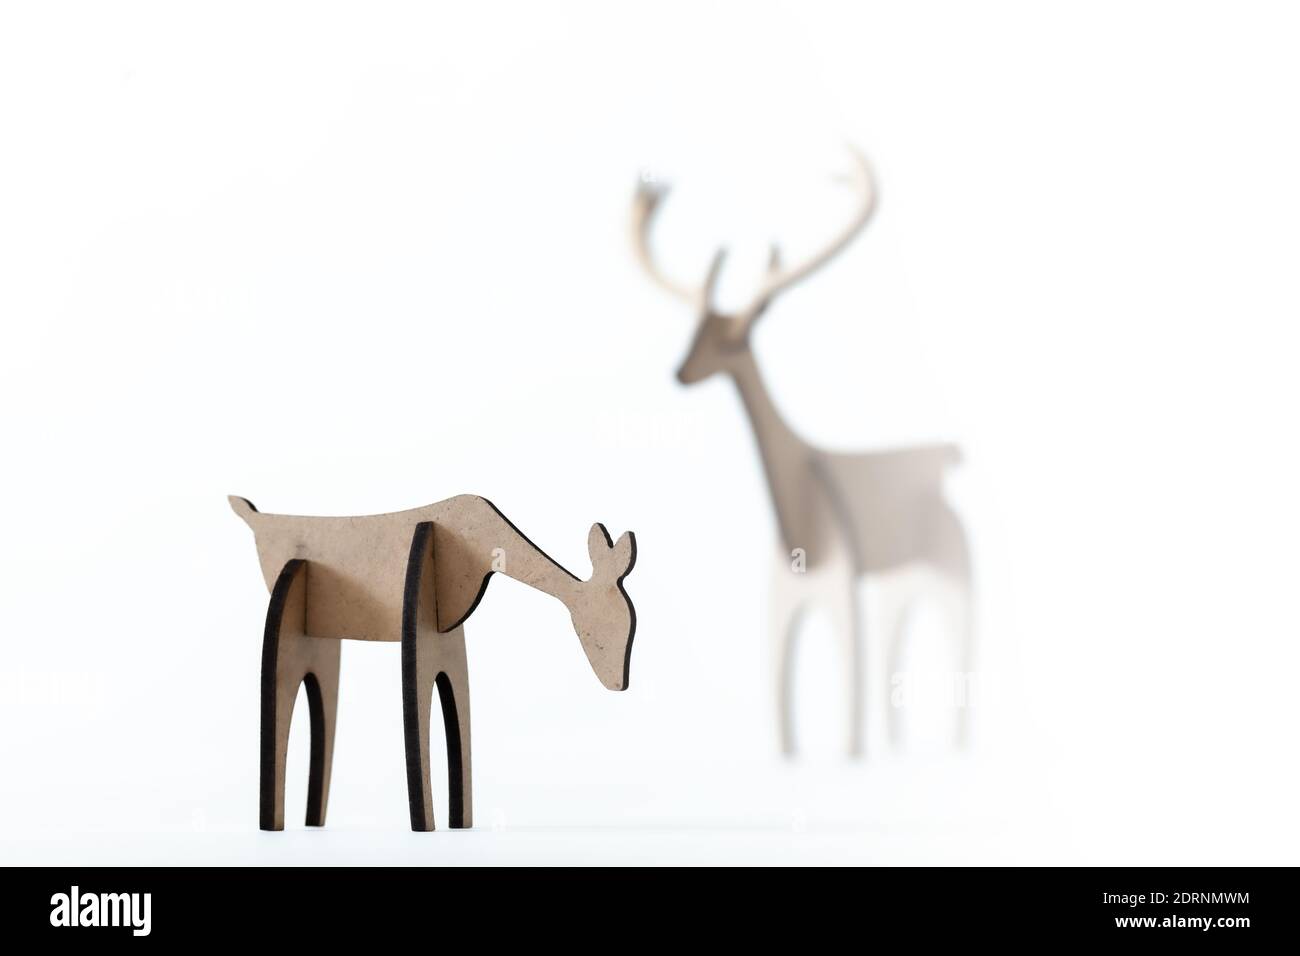 Reindeer stag and young deer cardboard toy isolated on a white background. Christmas icon and shapes with text space Stock Photo